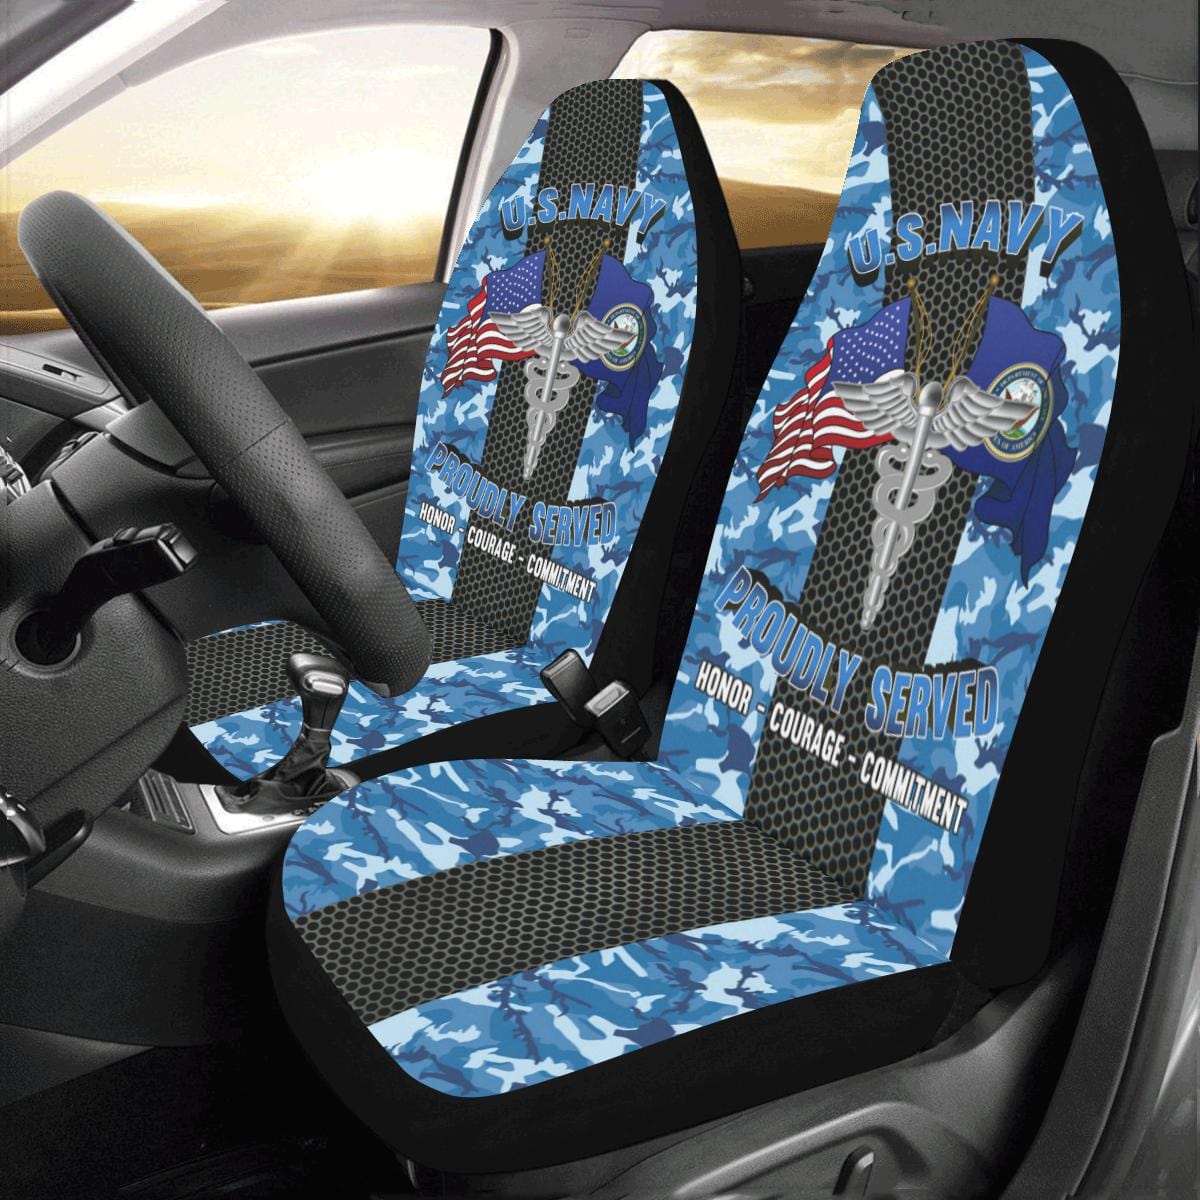 U.S Navy Hospital Corpsman Navy HM Car Seat Covers (Set of 2)-SeatCovers-Navy-Rate-Veterans Nation